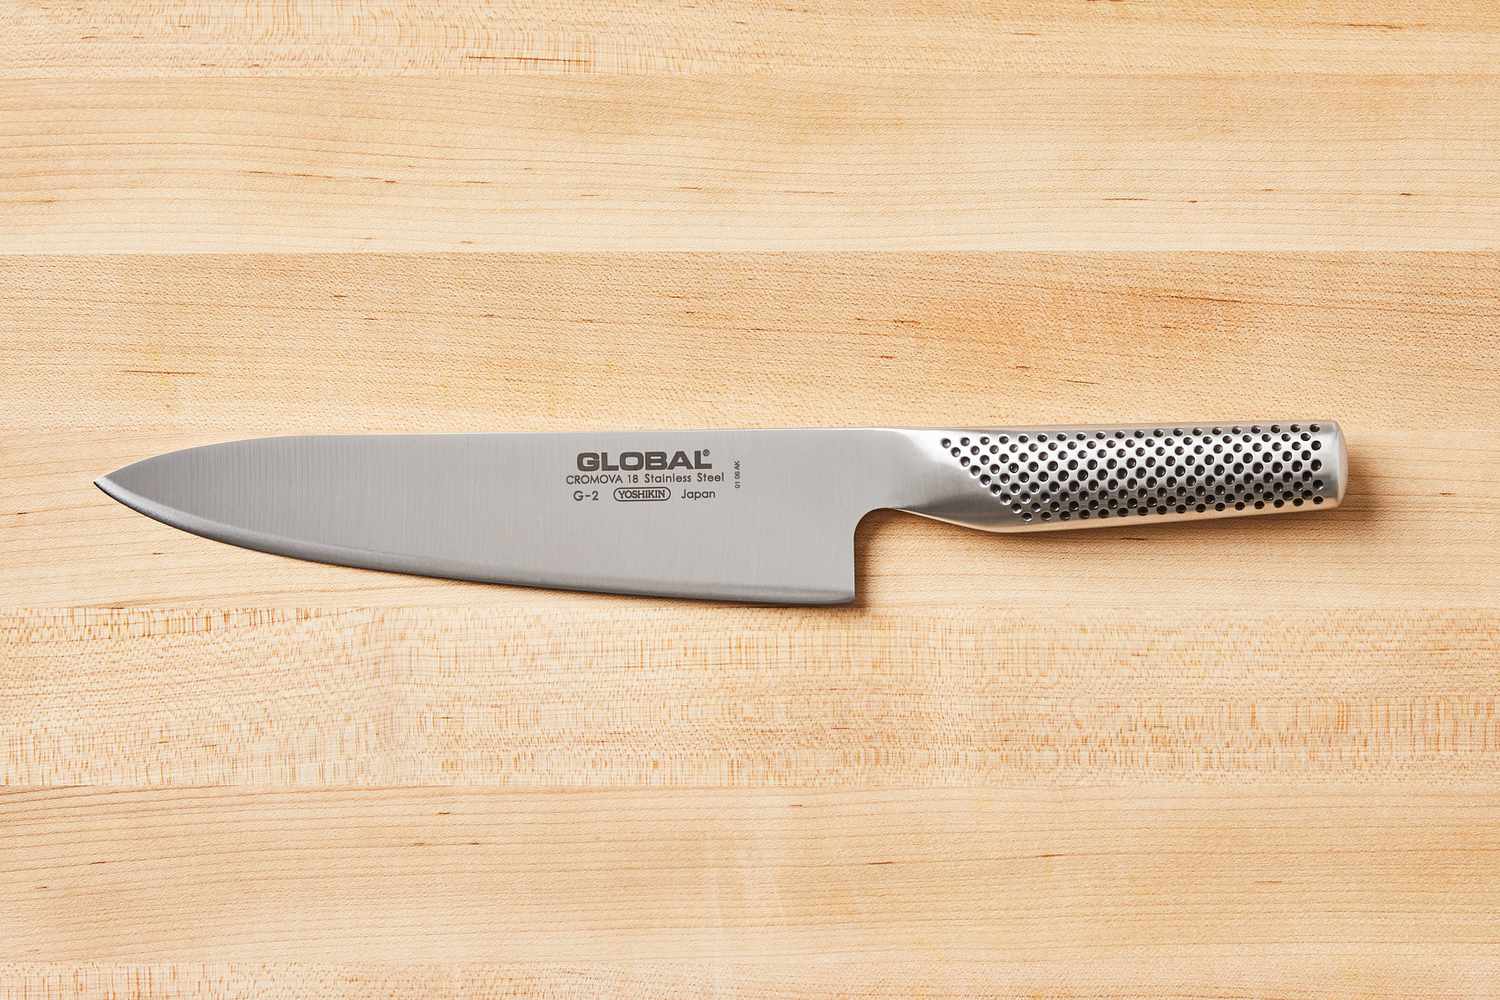 Global 8-Inch Chef's Knife displayed on a wooden cutting board